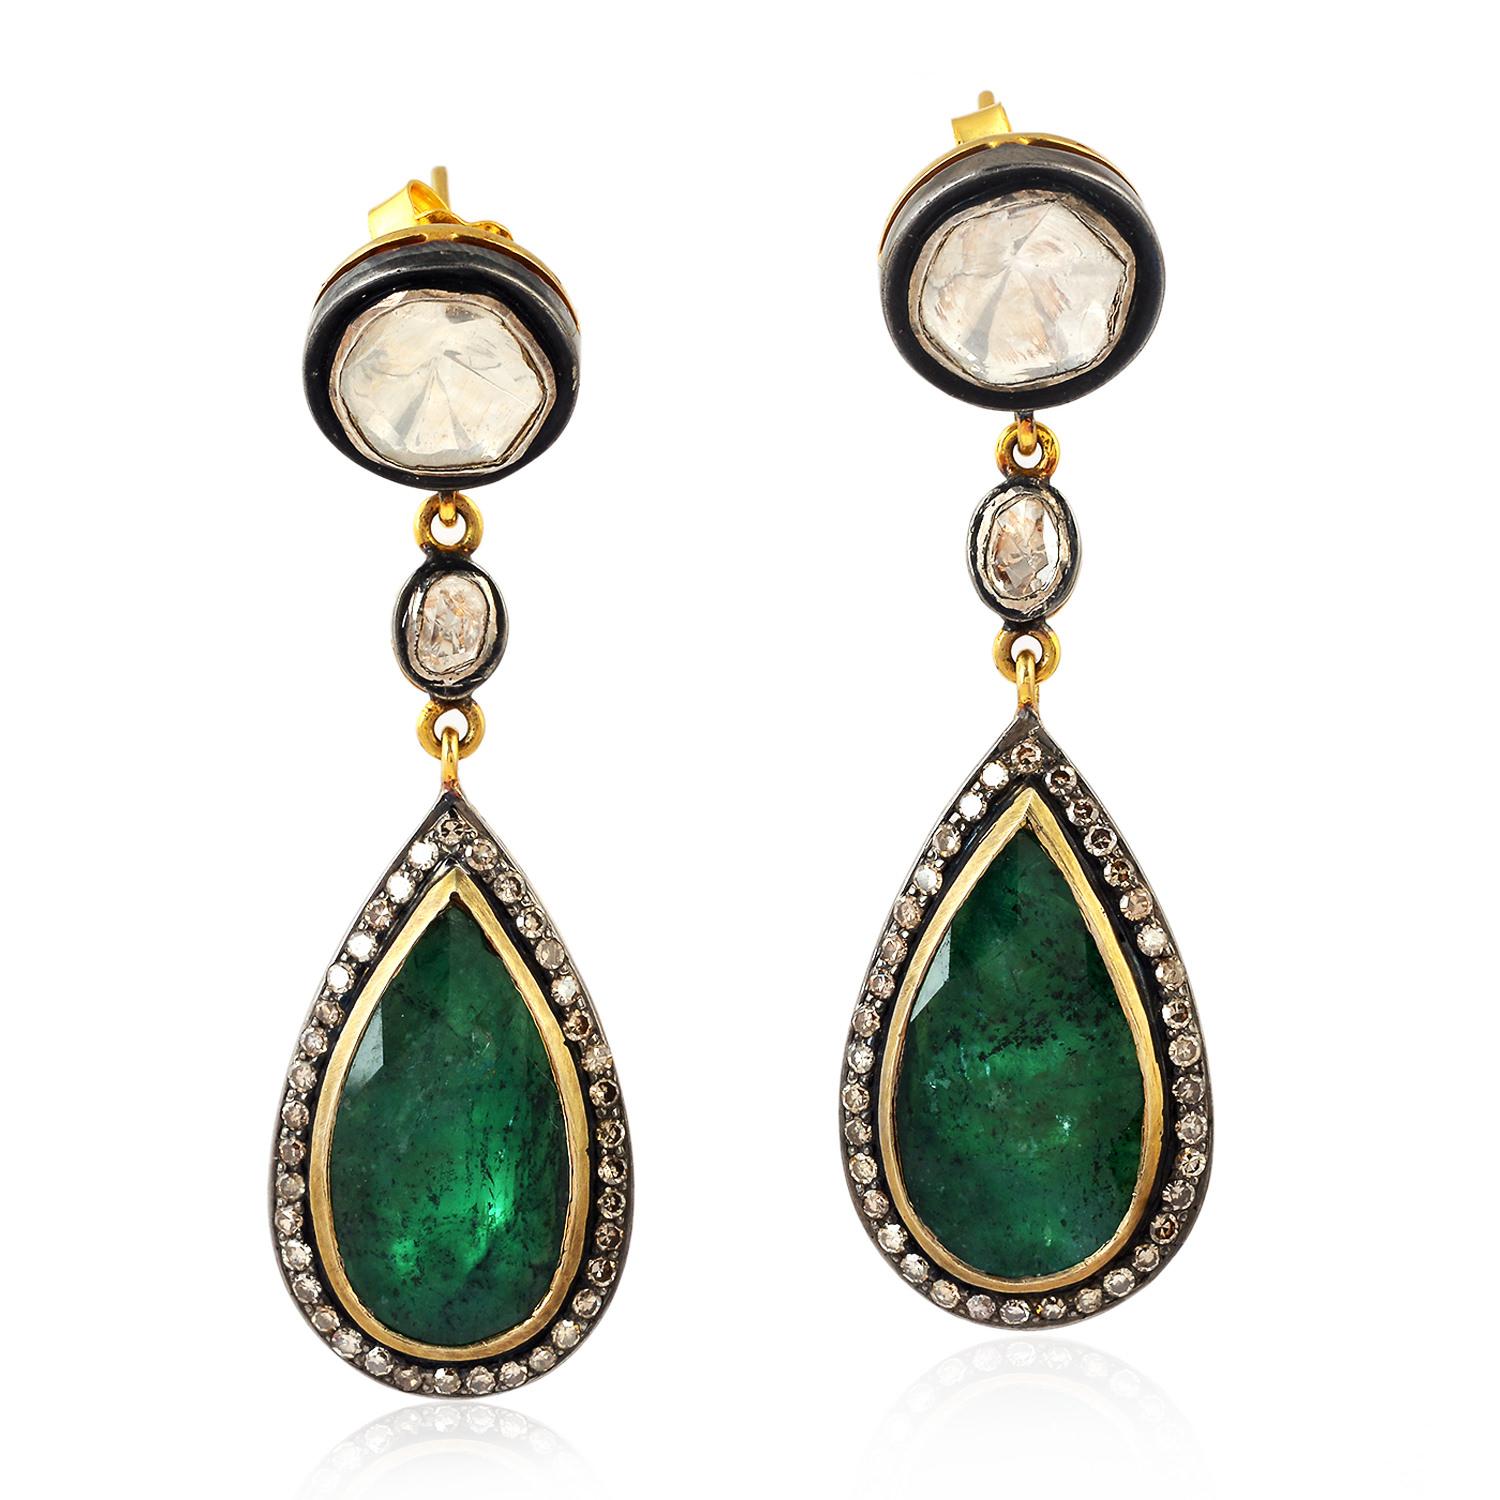 Early Victorian Dangling Diamond and Emerald Earring in Silver and Gold